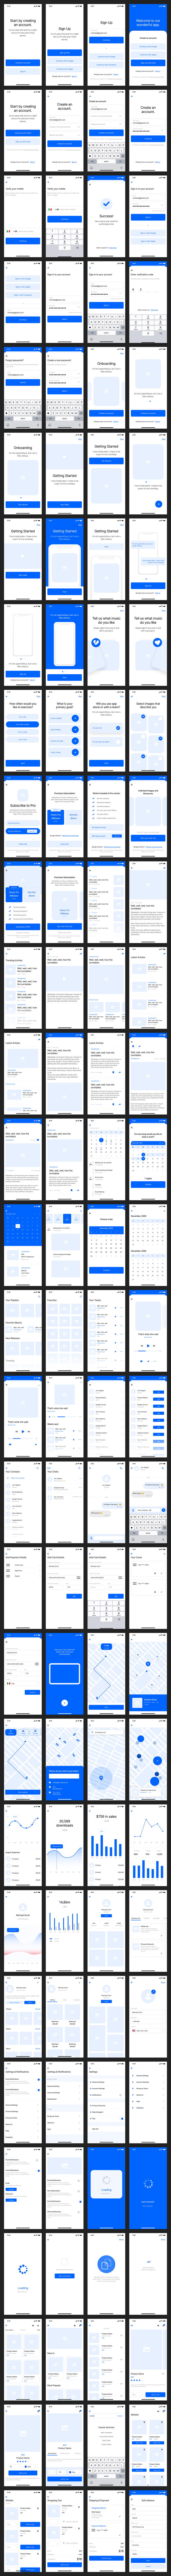 Free iOS 14 Wireframe UI Kit for Adobe XD - Minimal and clean app design. This one features 120 screens you can use for wireframing your iPhone app ideas.